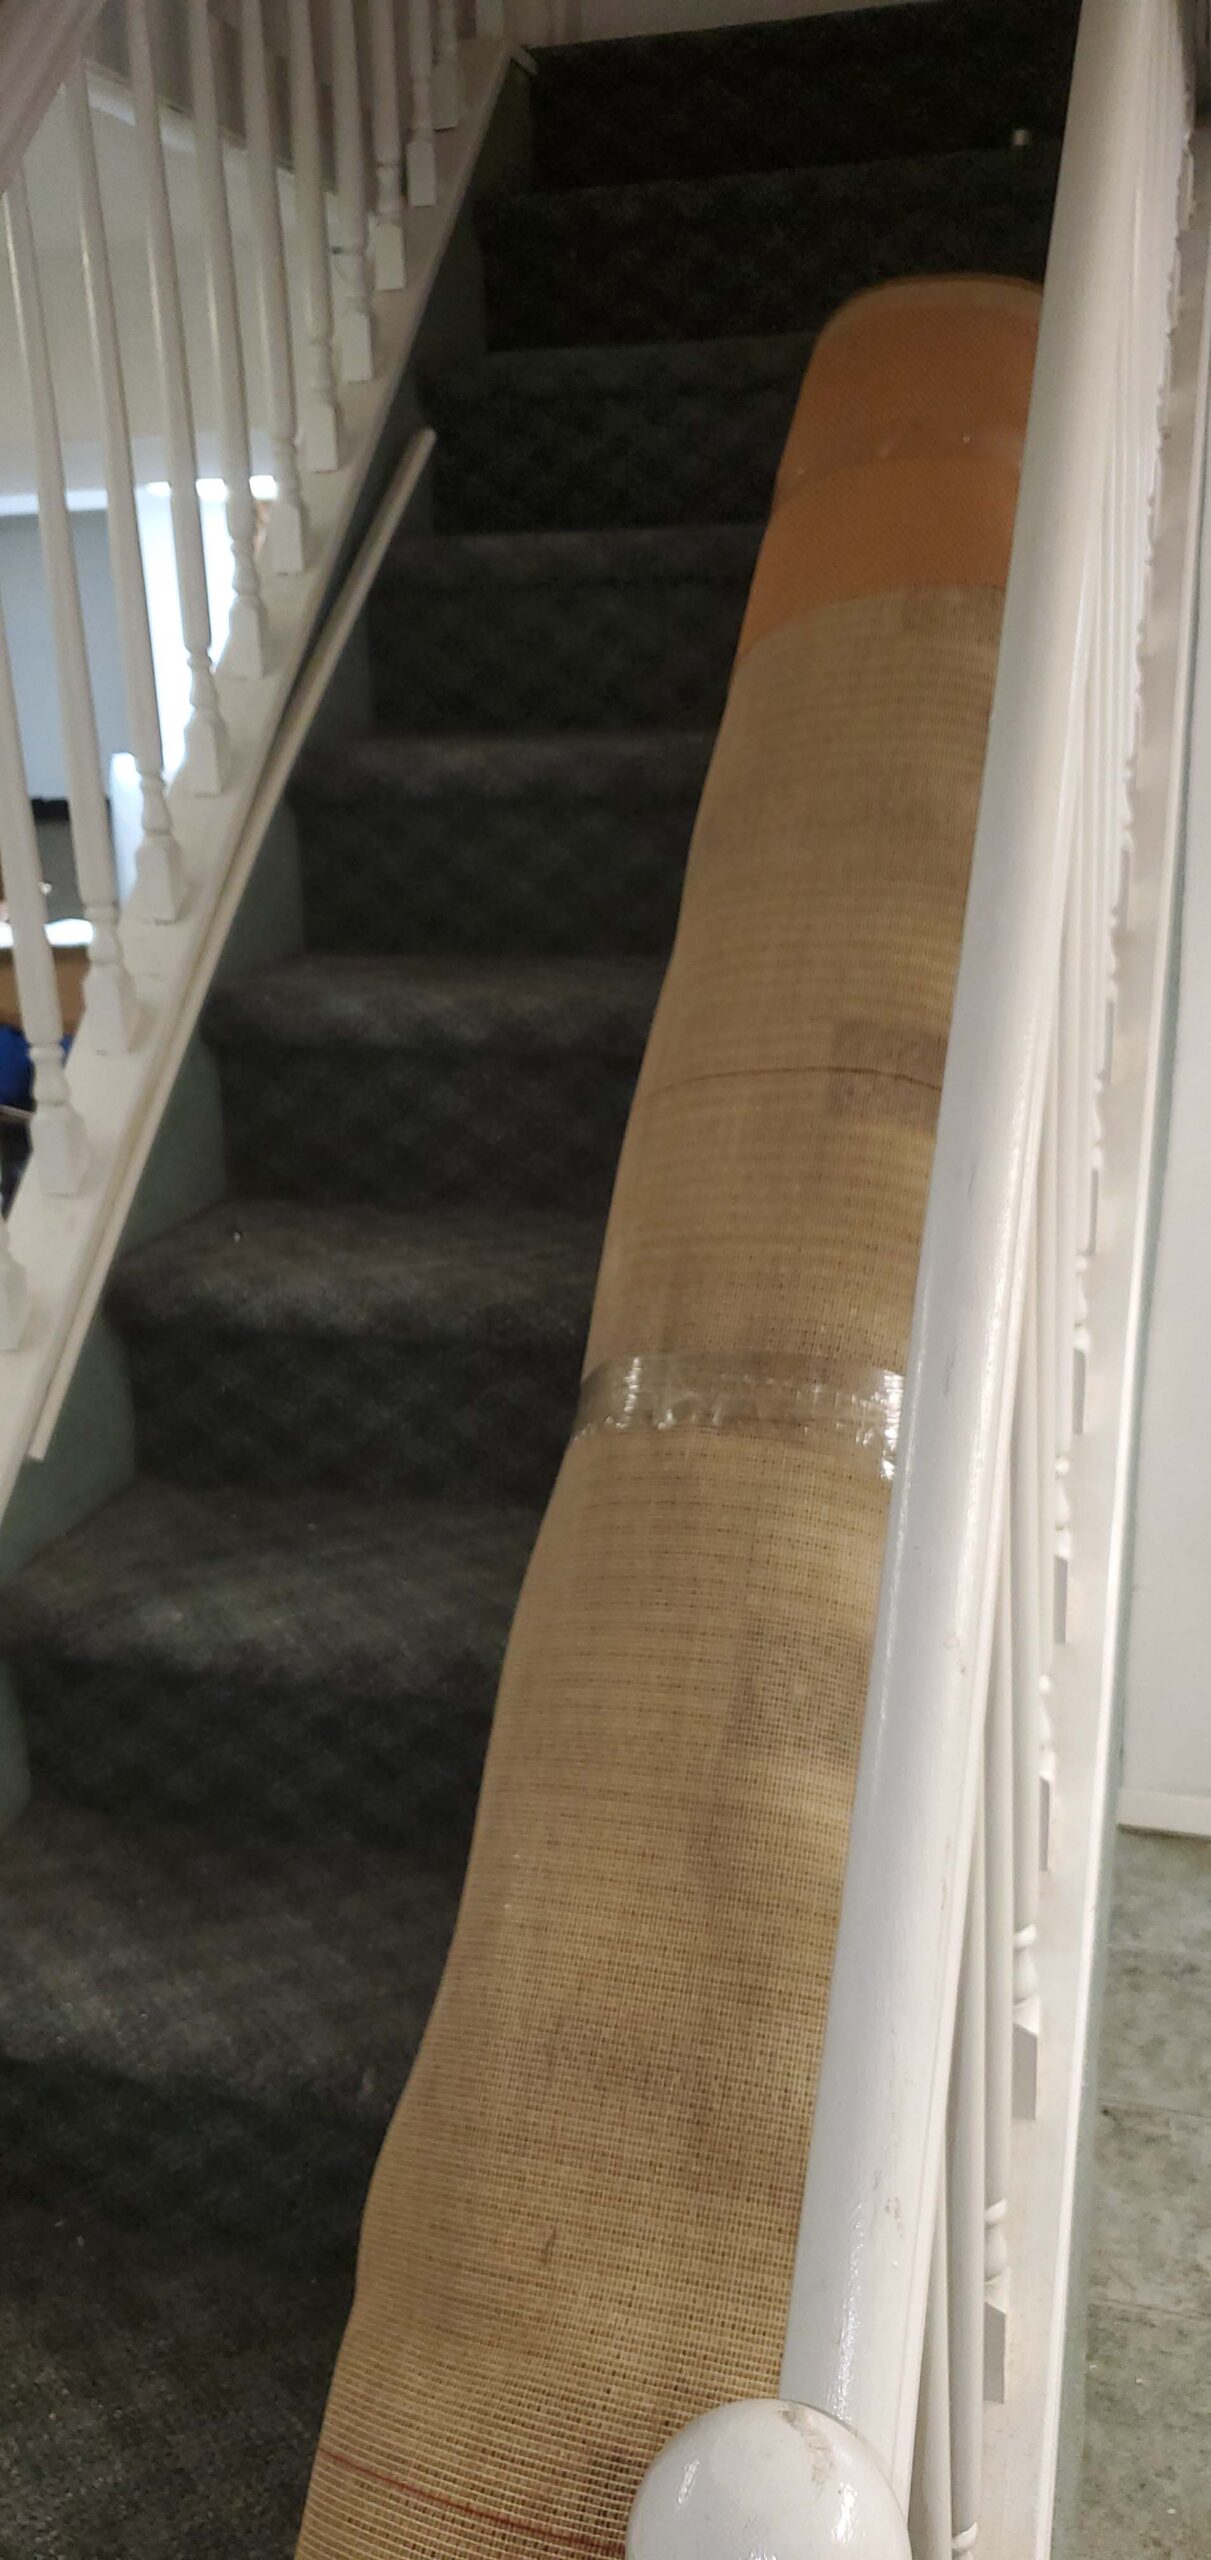 rug and stairs water damage in flushing ny